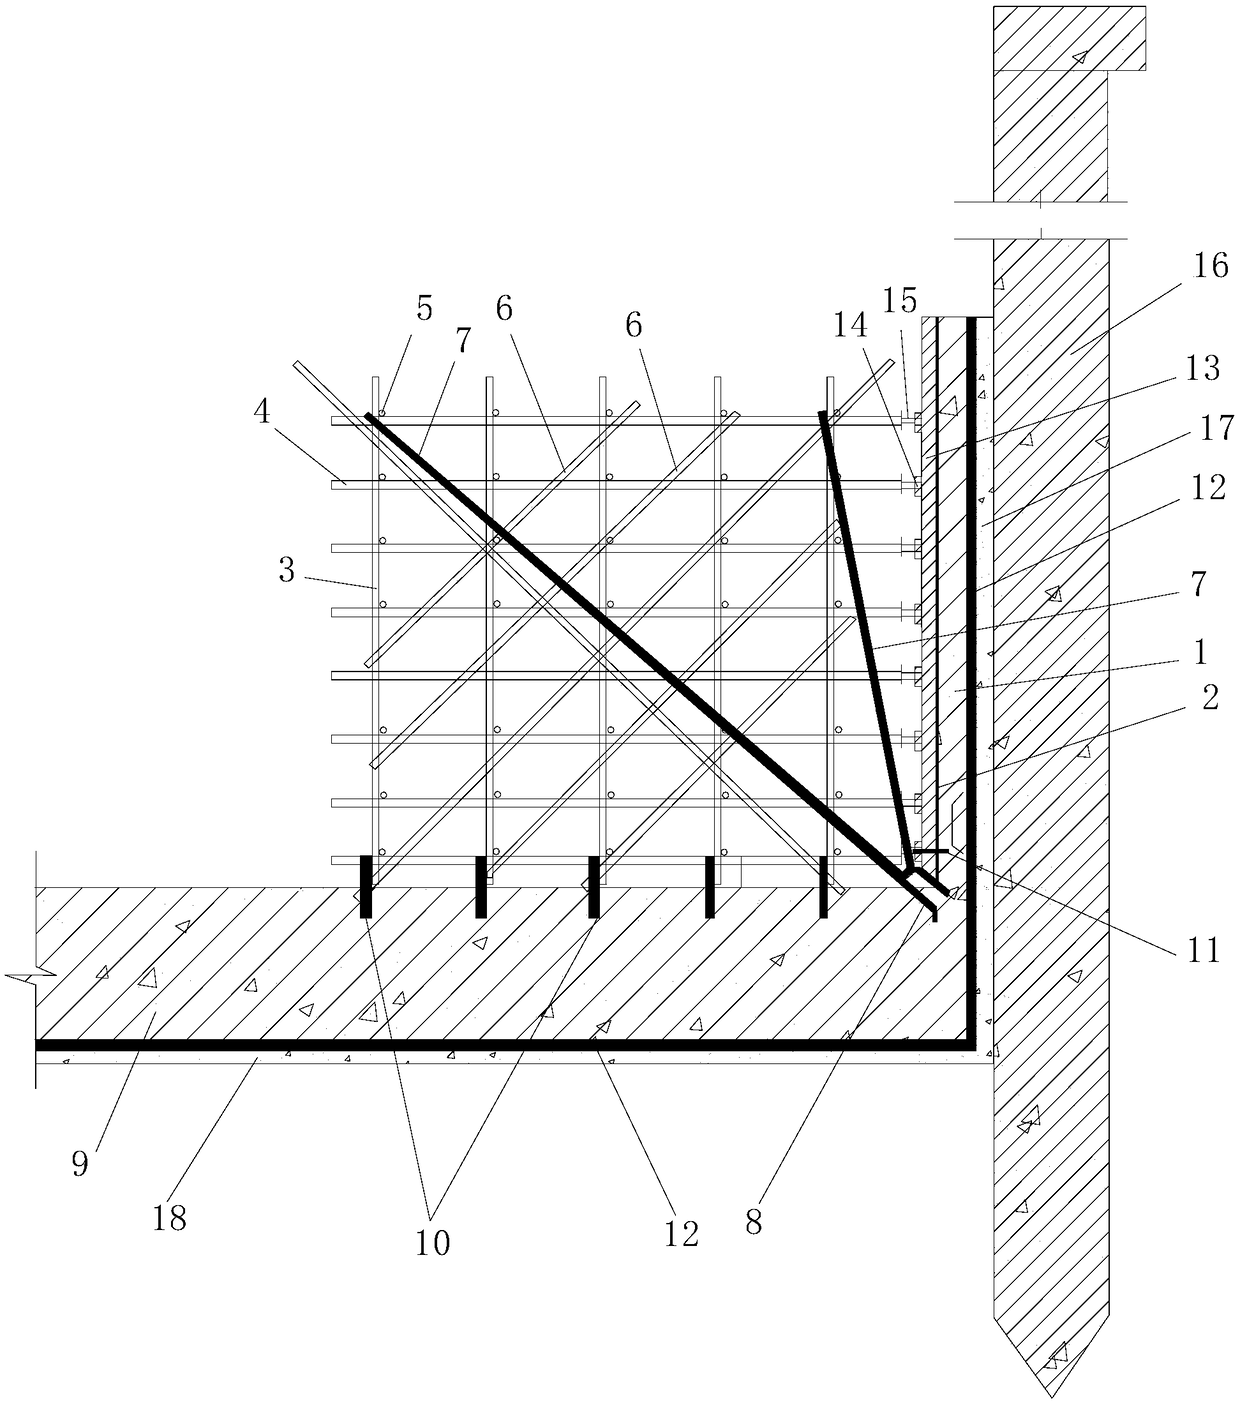 Construction method of single-side formwork support for basement exterior wall based on steel pipe truss